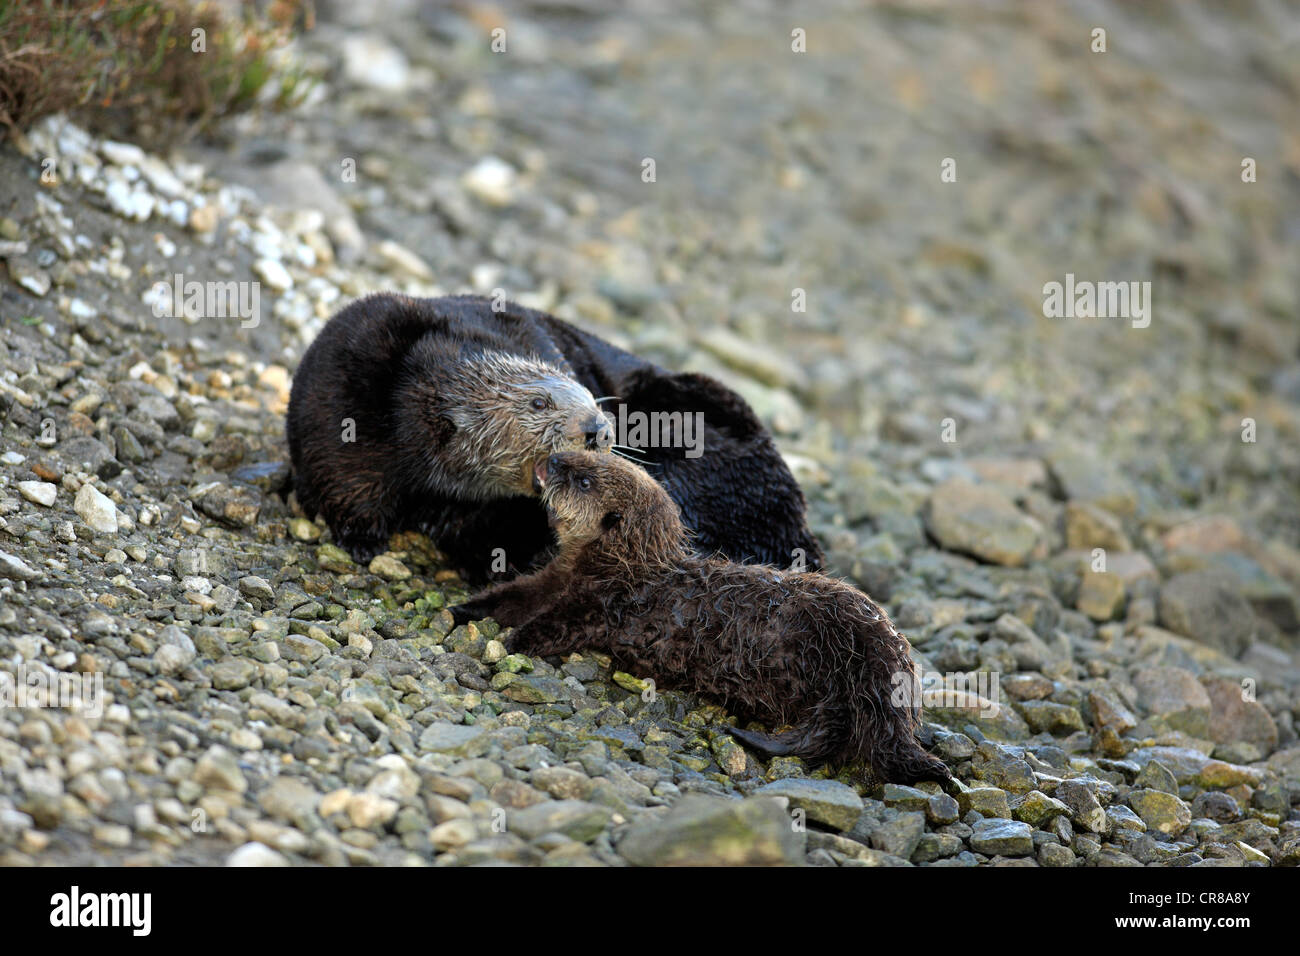 Sea otters (Enhydra lutris), female adult with young, Monterey, California, USA, America Stock Photo